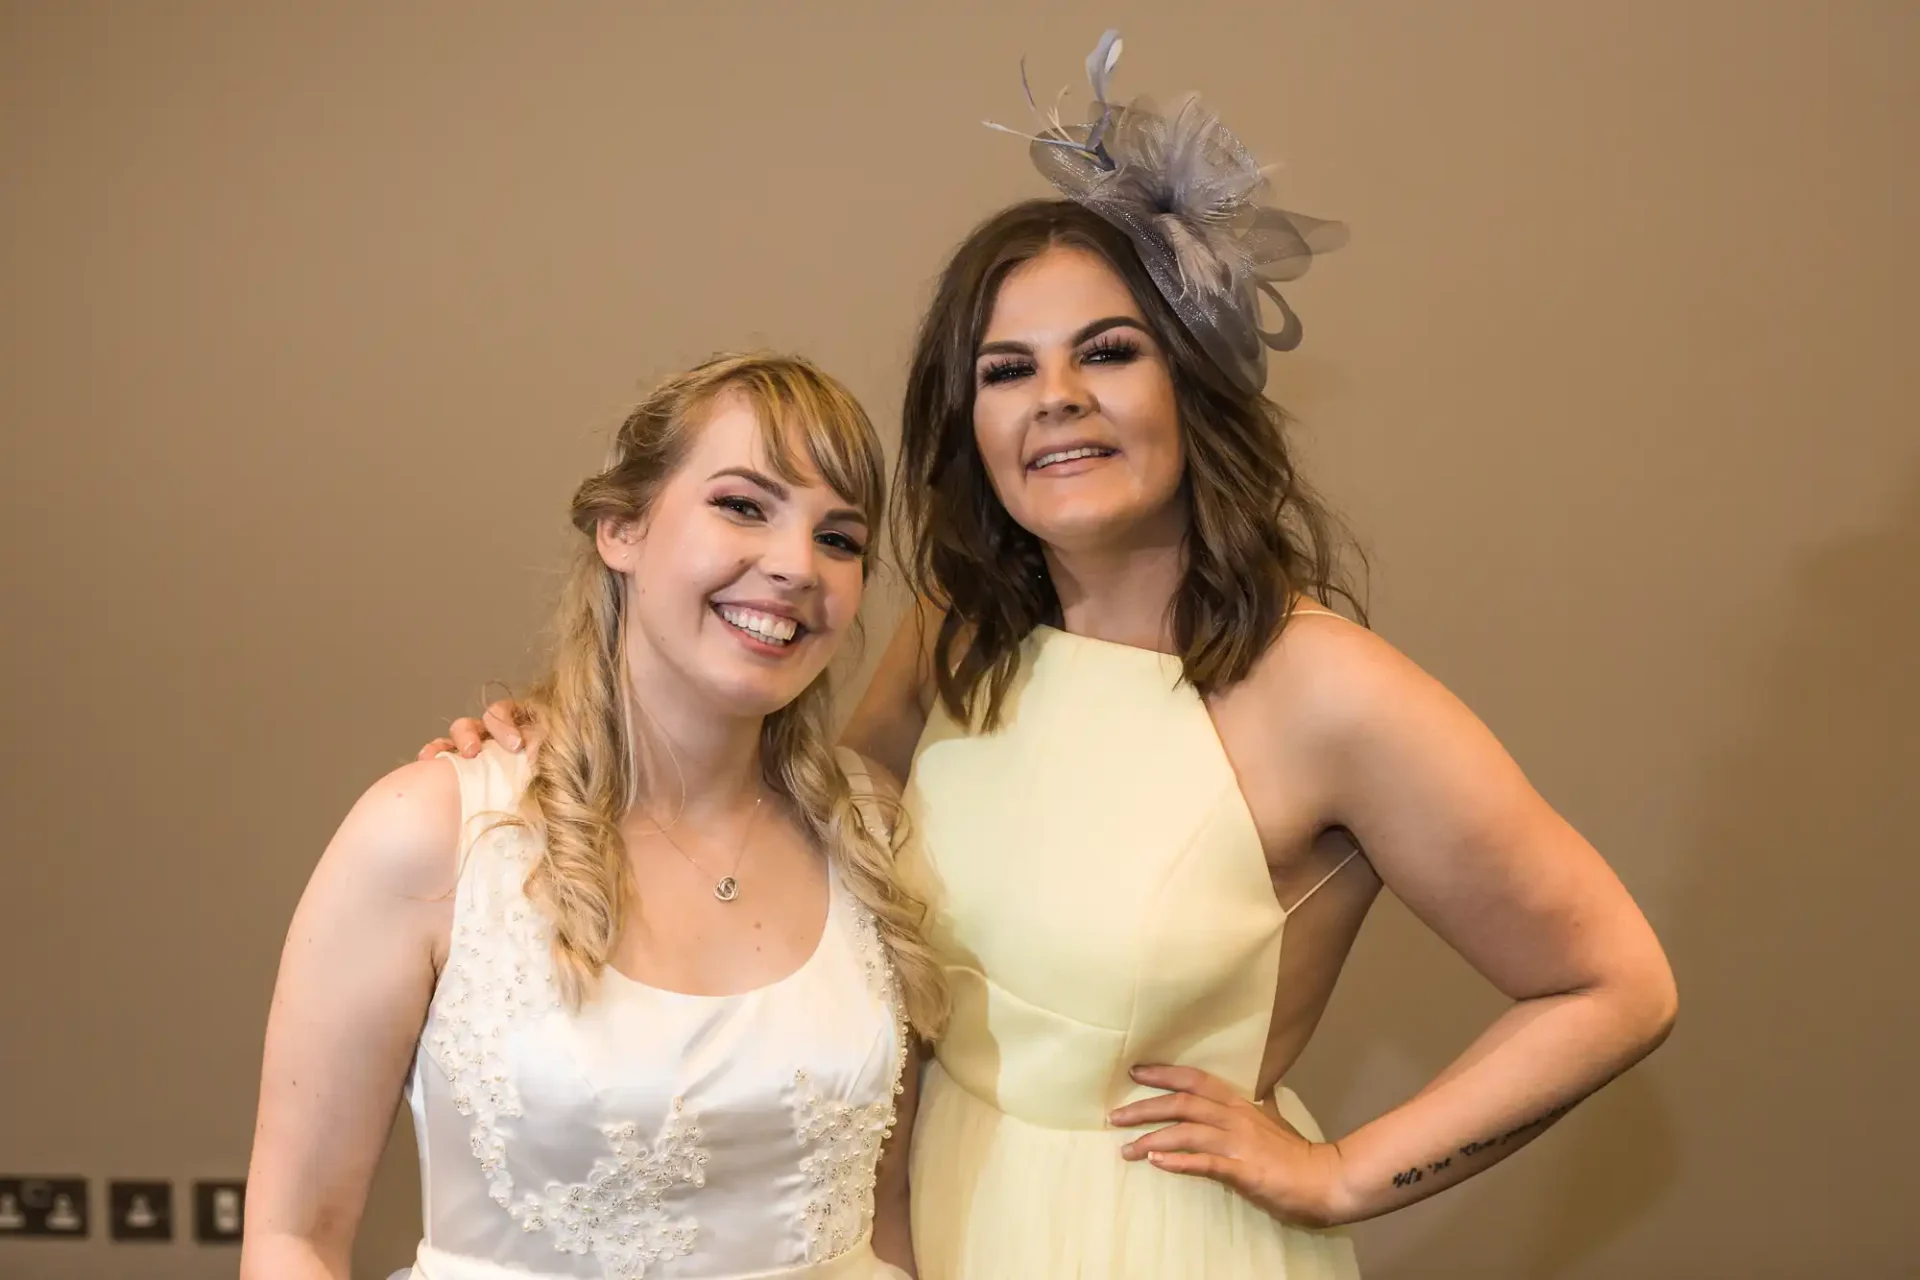 Two women smiling at a formal event, one in a white bridal dress and the other in a yellow dress with a gray fascinator.